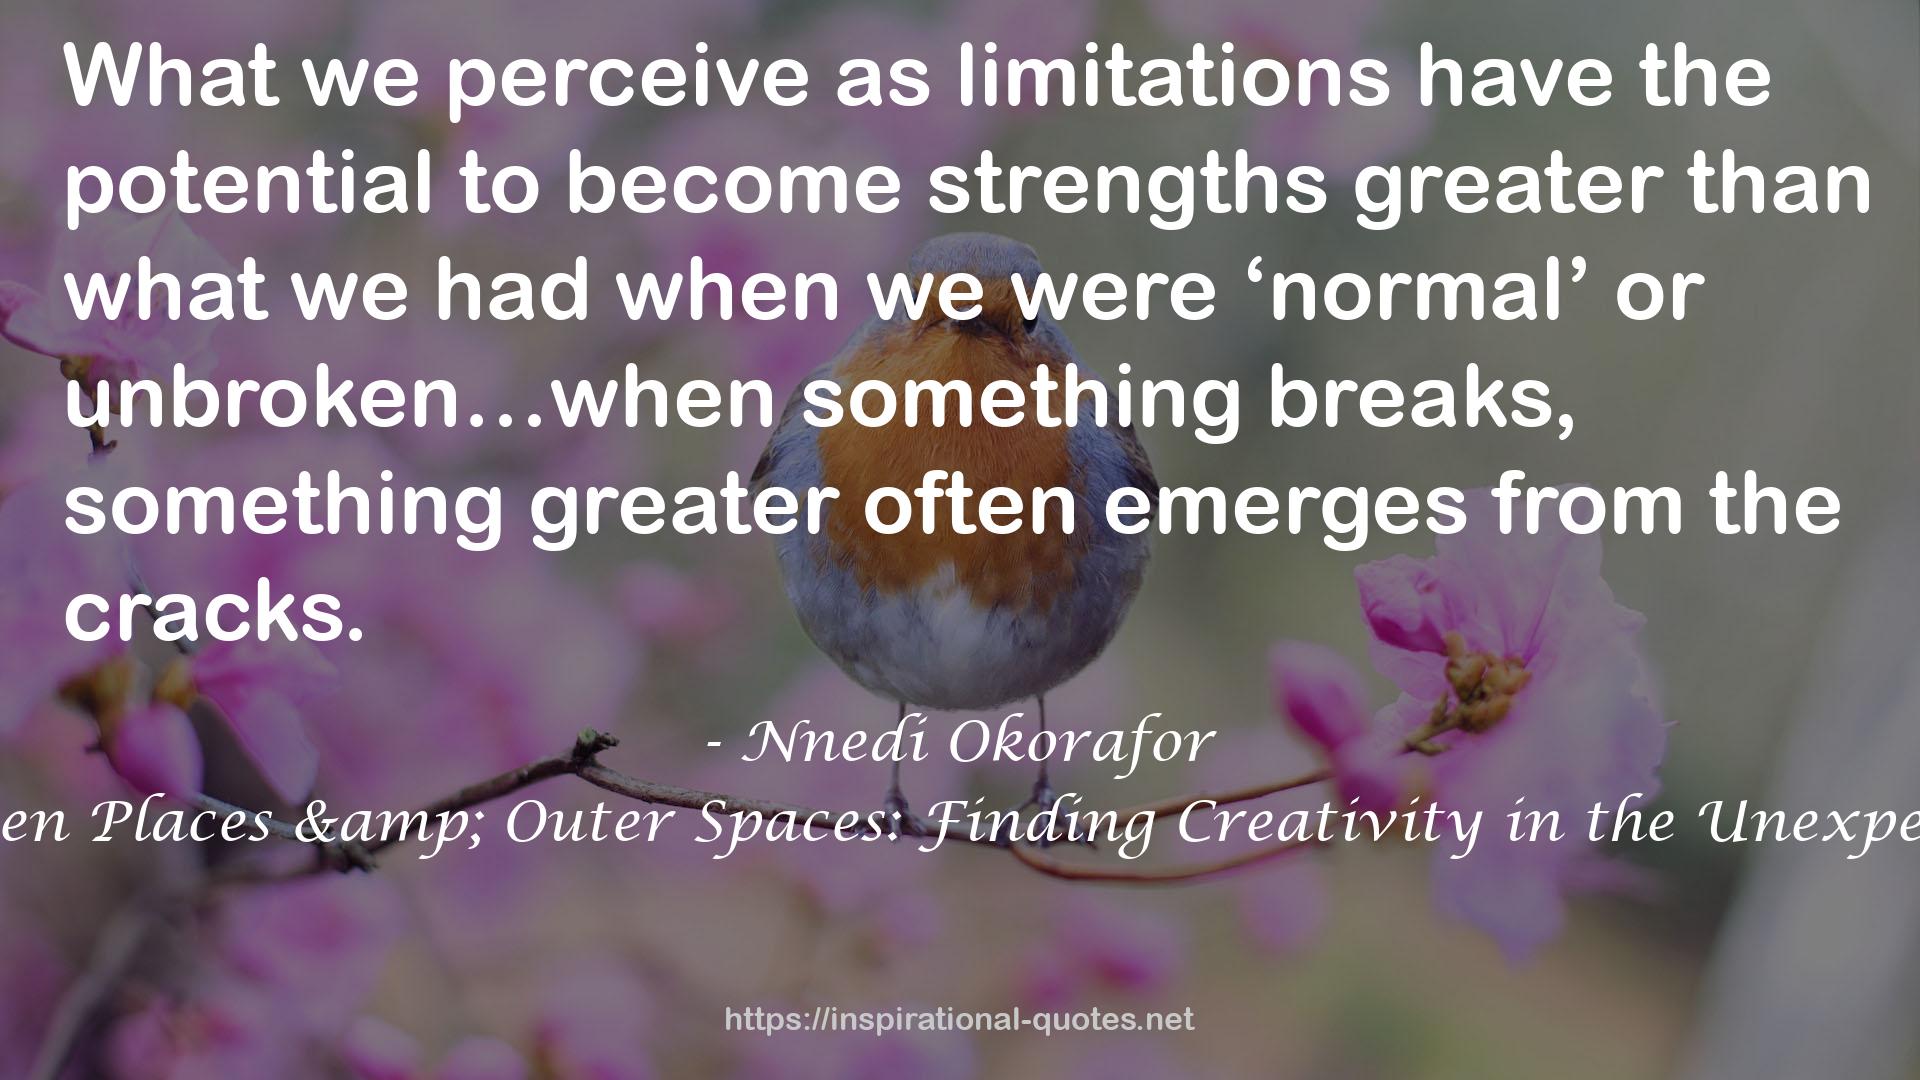 Broken Places & Outer Spaces: Finding Creativity in the Unexpected QUOTES